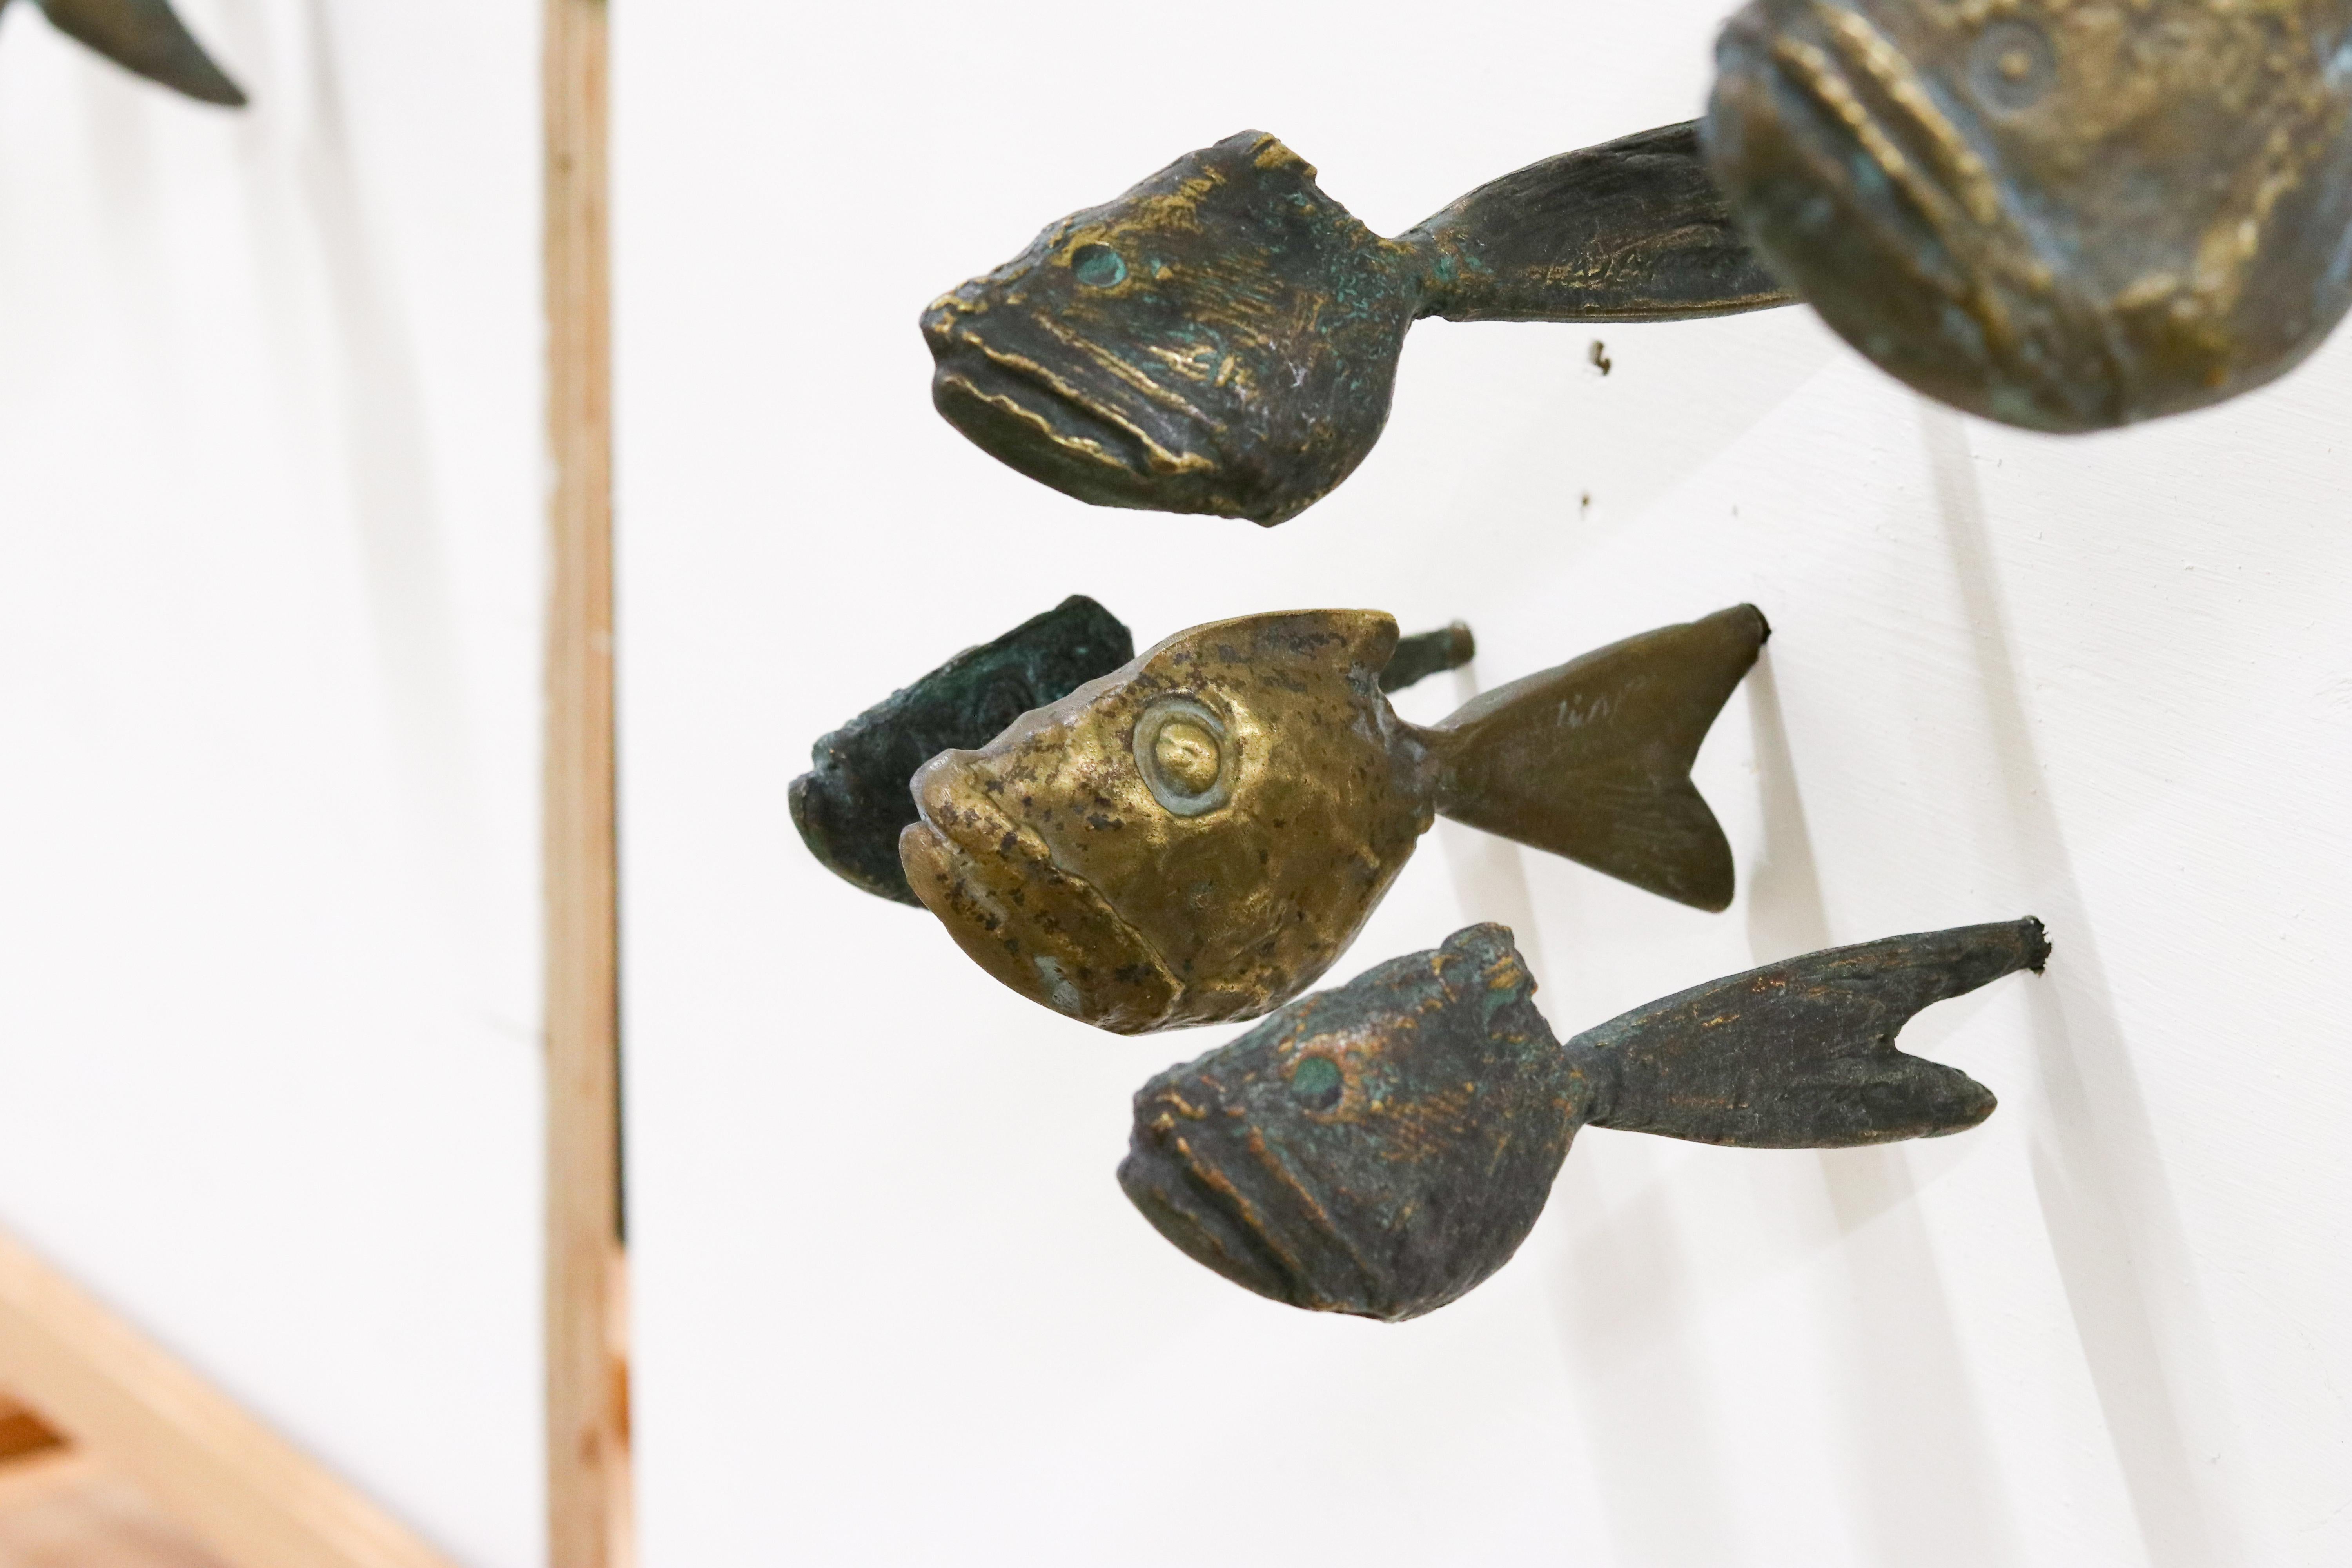 45 fishes of bronze for wall mounting. 
This special bronze object consists of 45 bronze piranhas made by Yrgos Kypris. This Greek artist is known for his fish in all shapes and made of all kinds of material. 

This time he chooses to let the bronze